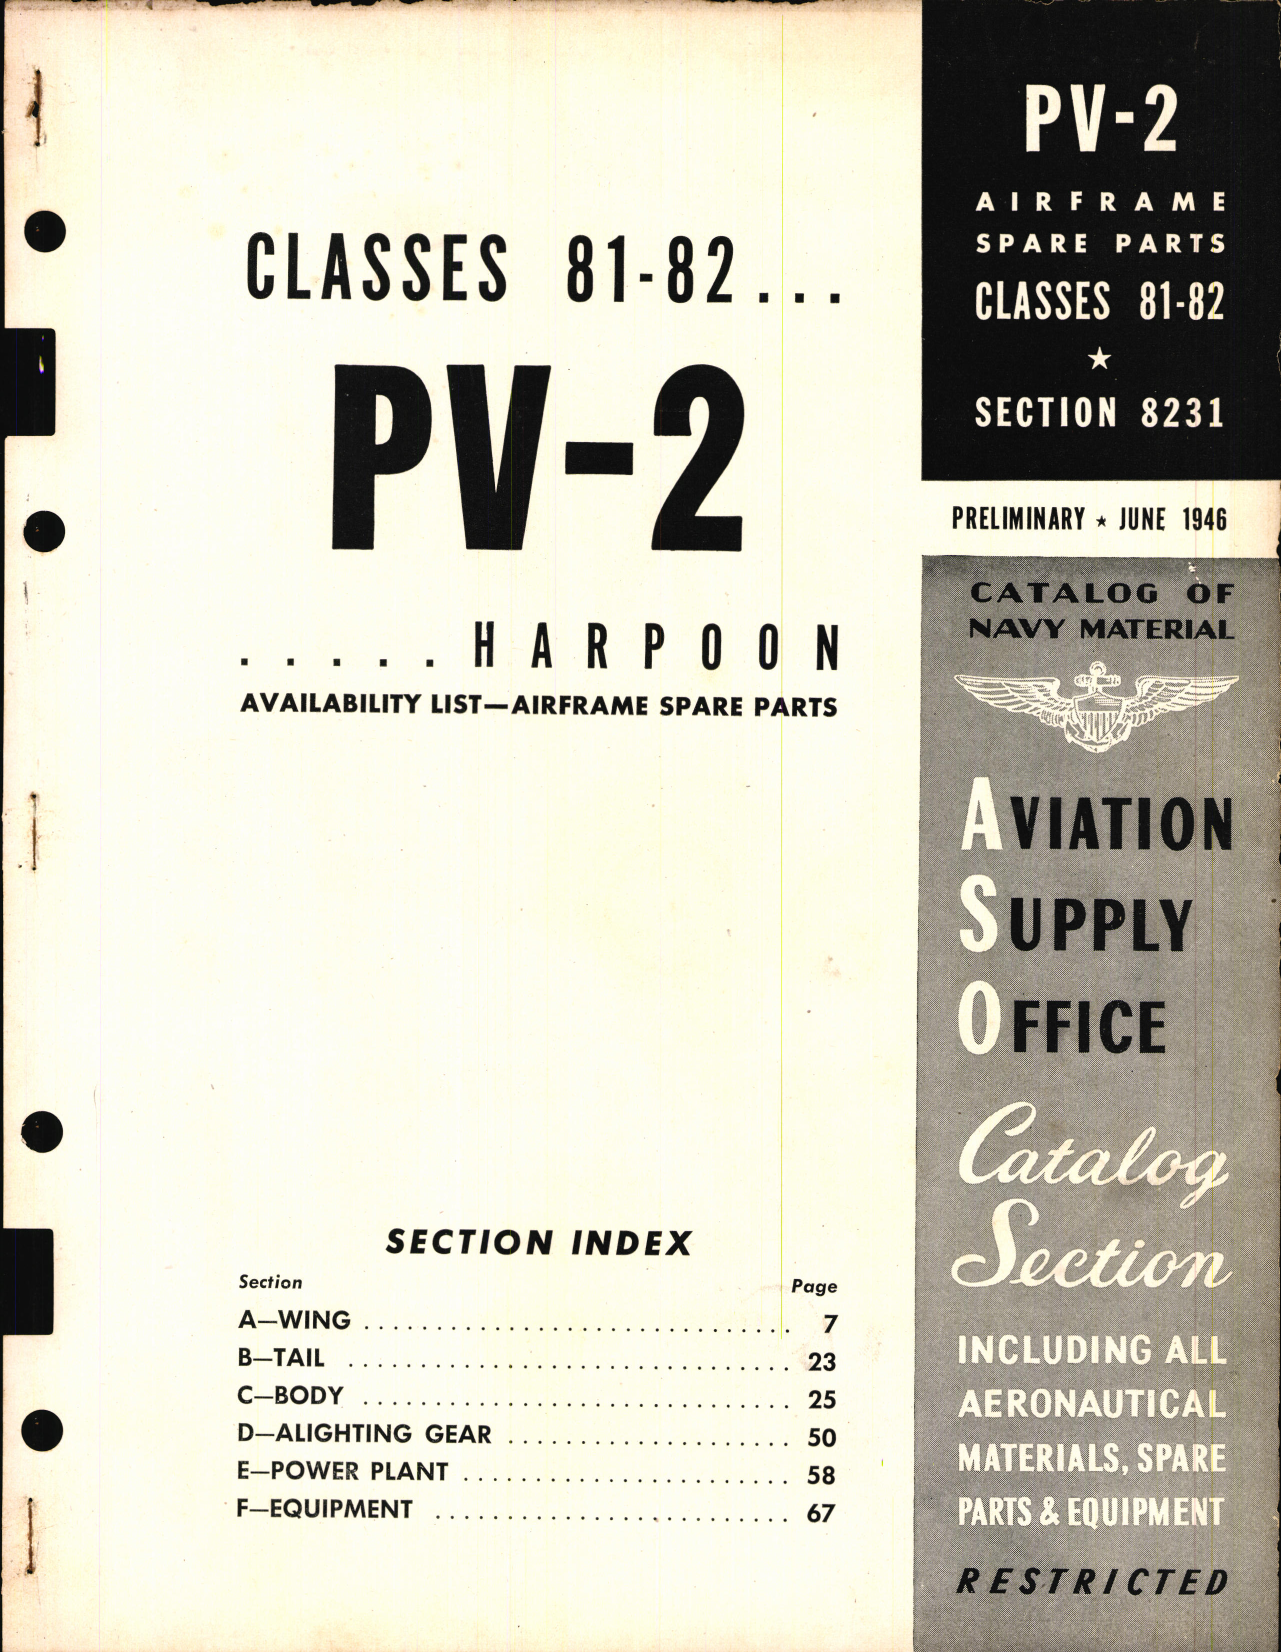 Sample page 1 from AirCorps Library document: PV-2 Harpoon Availability List and Airframe Spare Parts